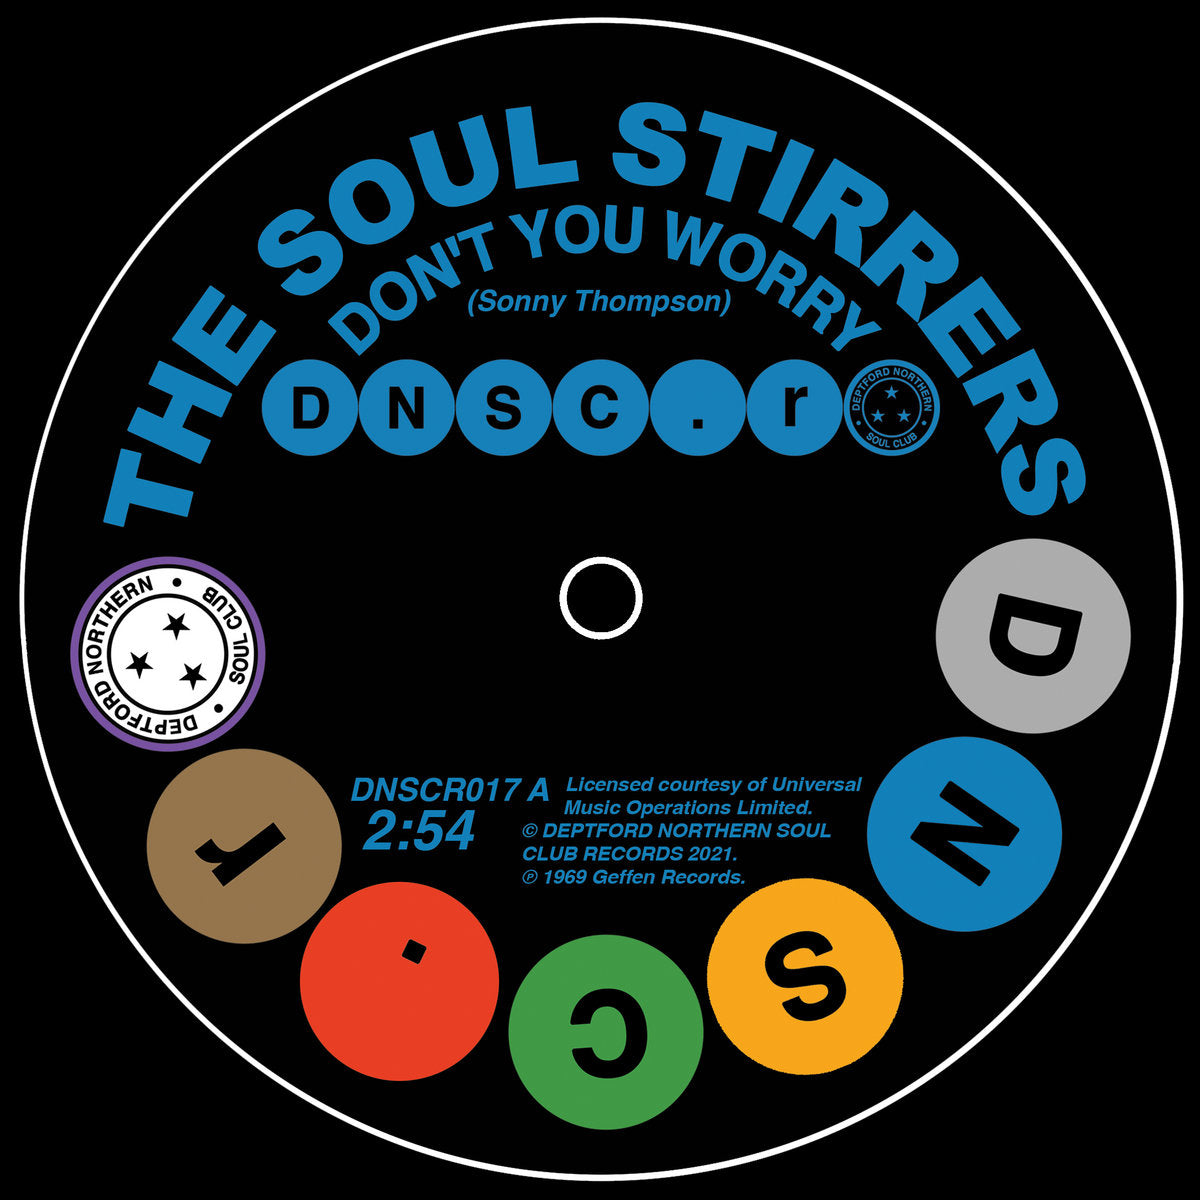 THE SOUL STIRRERS / THE SPINNERS - Don’t You Worry / Memories Of Her Love Keep Haunting Me - 7" - Vinyl